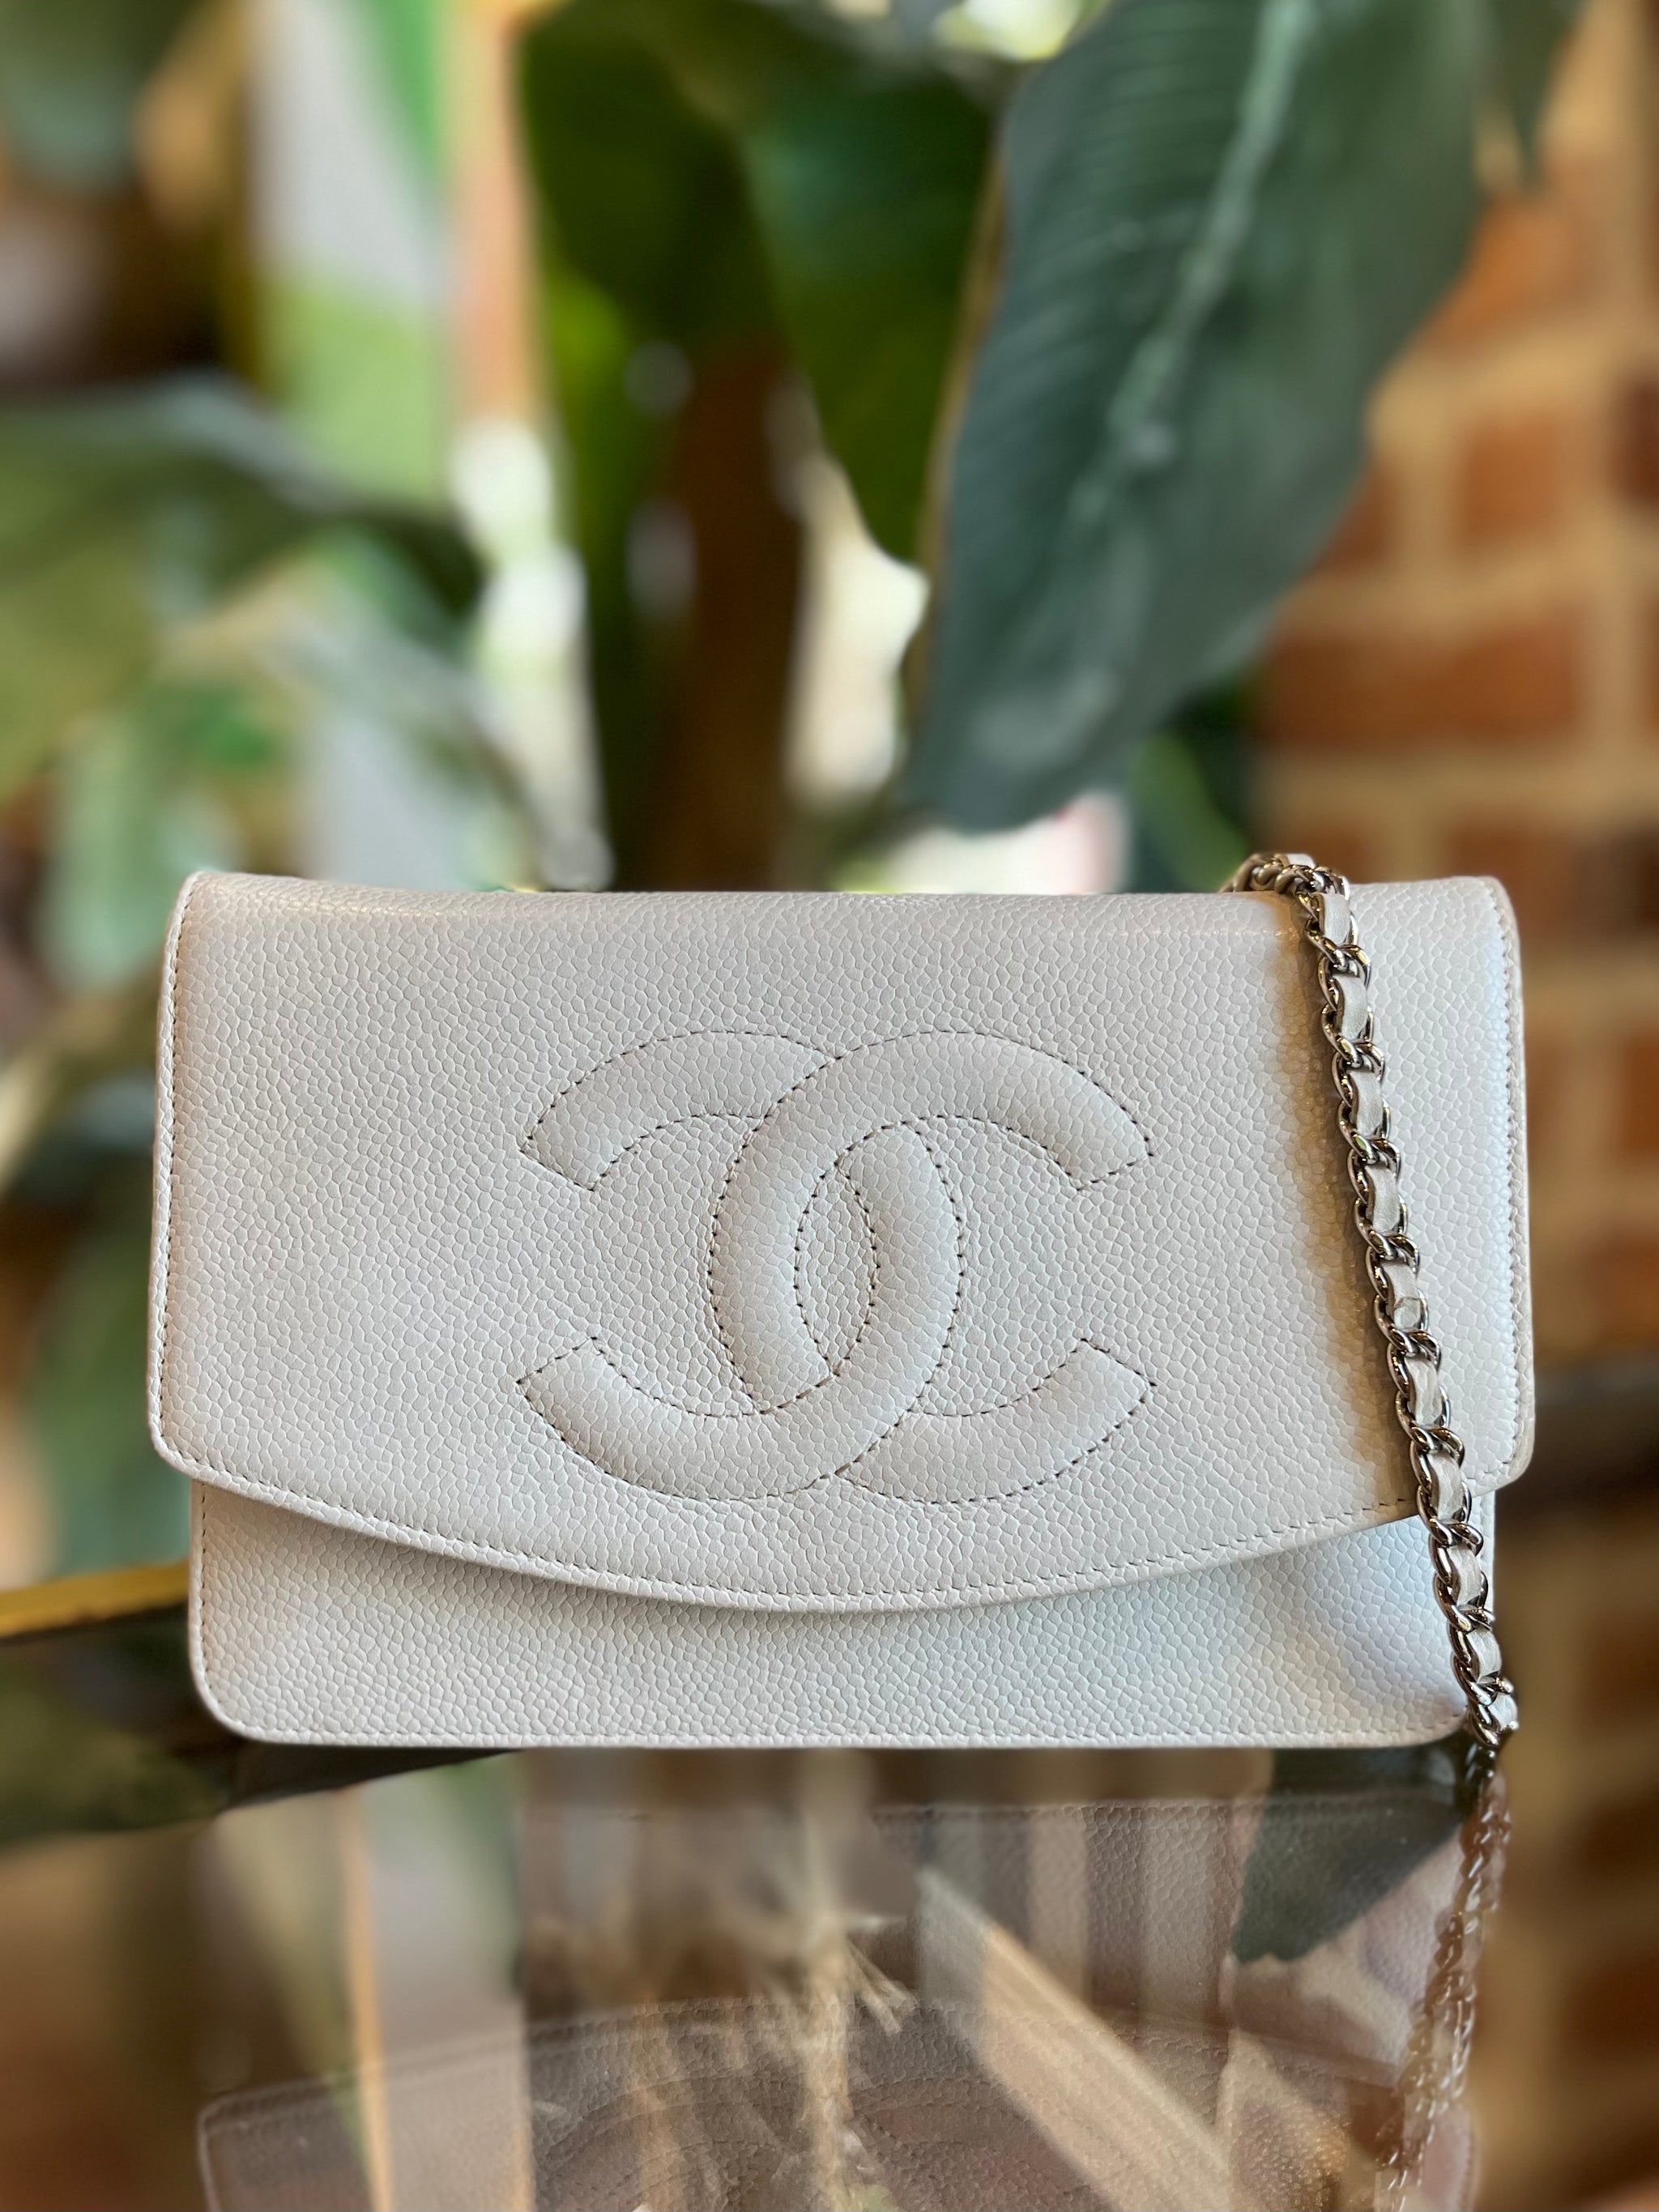 CHANEL White Caviar Leather Timeless Wallet on Chain - The Purse Ladies